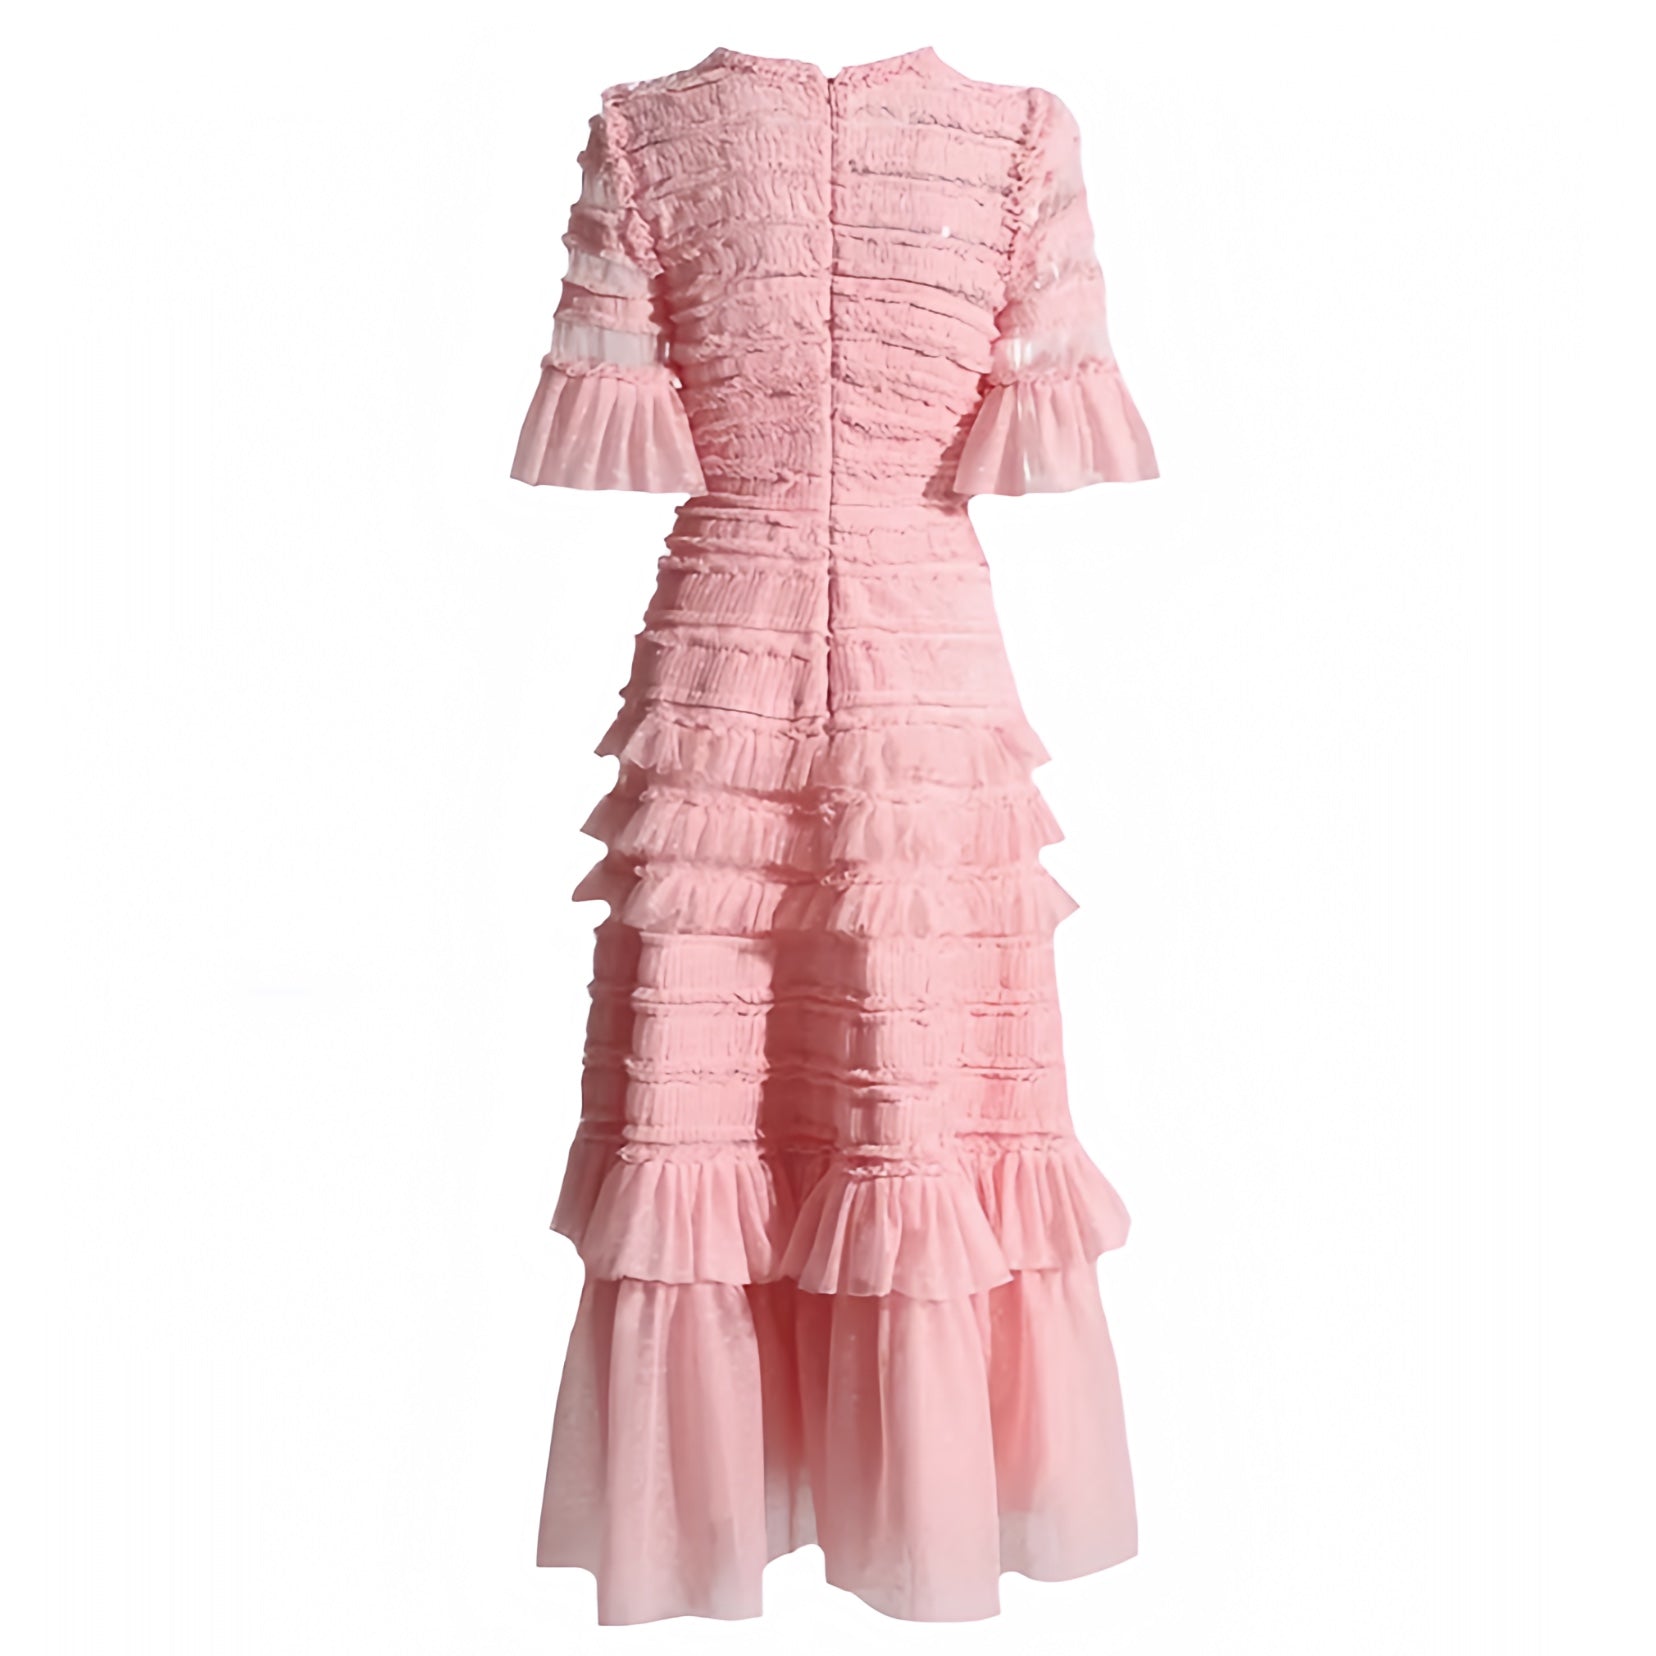 light-pink-layered-ruffle-trim-feathered-mesh-patterned-bodycon-slim-fitted-bodice-drop-waist-round-neck-short-sleeve-flowy-tiered-fit-and-flare-midi-long-maxi-dress-ball-gown-couture-women-ladies-chic-trendy-spring-2024-summer-semi-formal-elegant-classy-casual-feminine-gala-prom-debutante-wedding-guest-party-preppy-style-beach-vacation-sundress-zimmerman-revolve-loveshackfancy-dupe